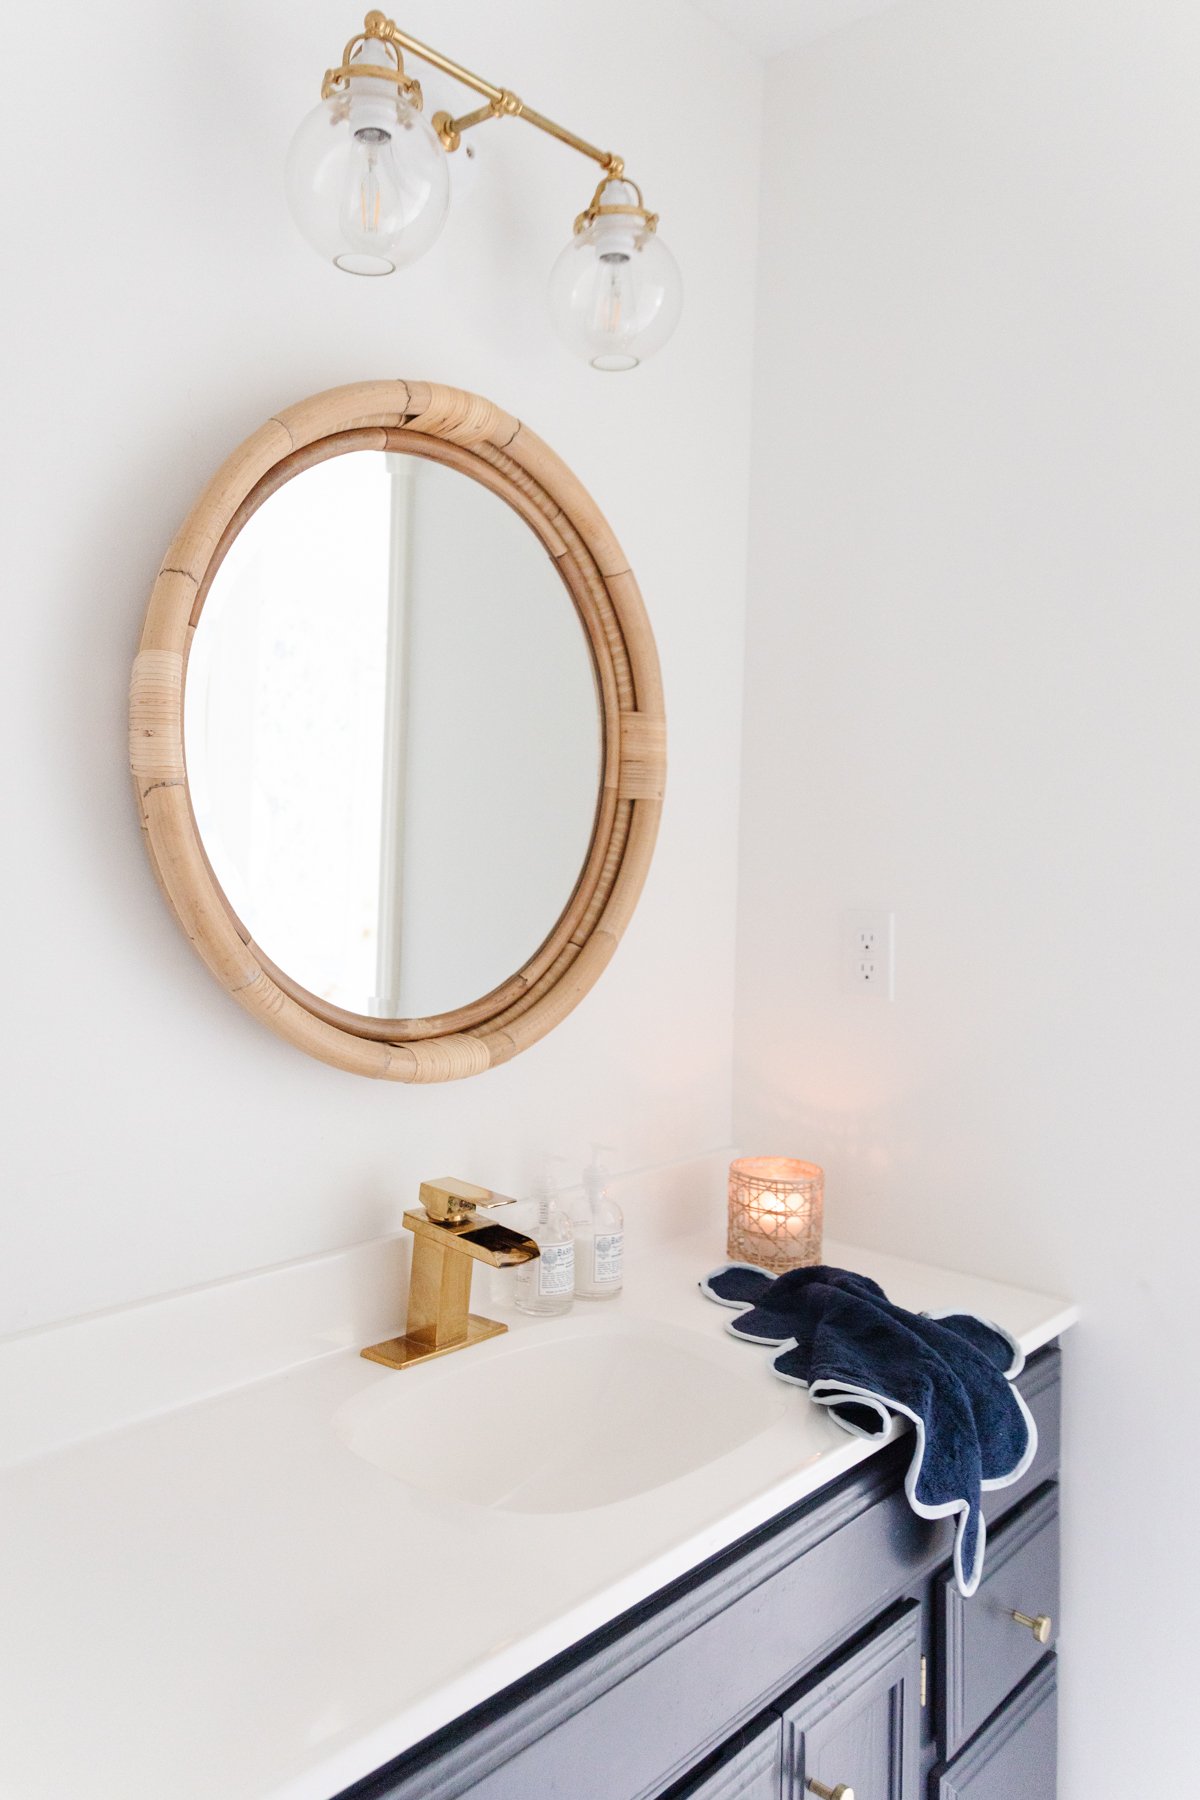 A nautical-themed bathroom vanity with a round mirror and blue towels.